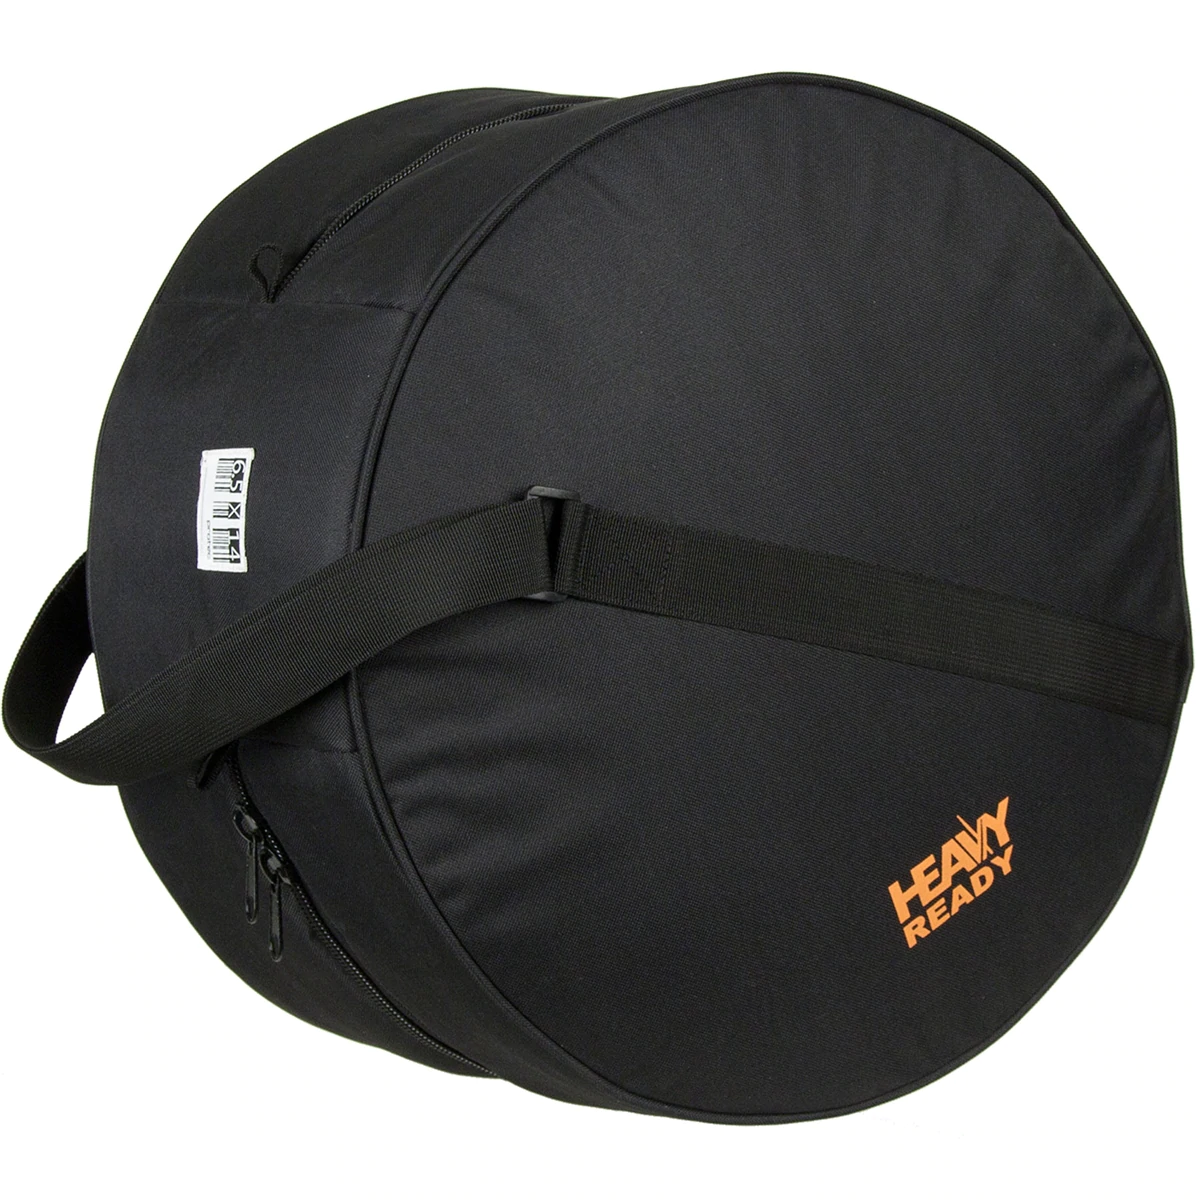 PROTEC Heavy Ready Padded  Snare Bag 14x6.5